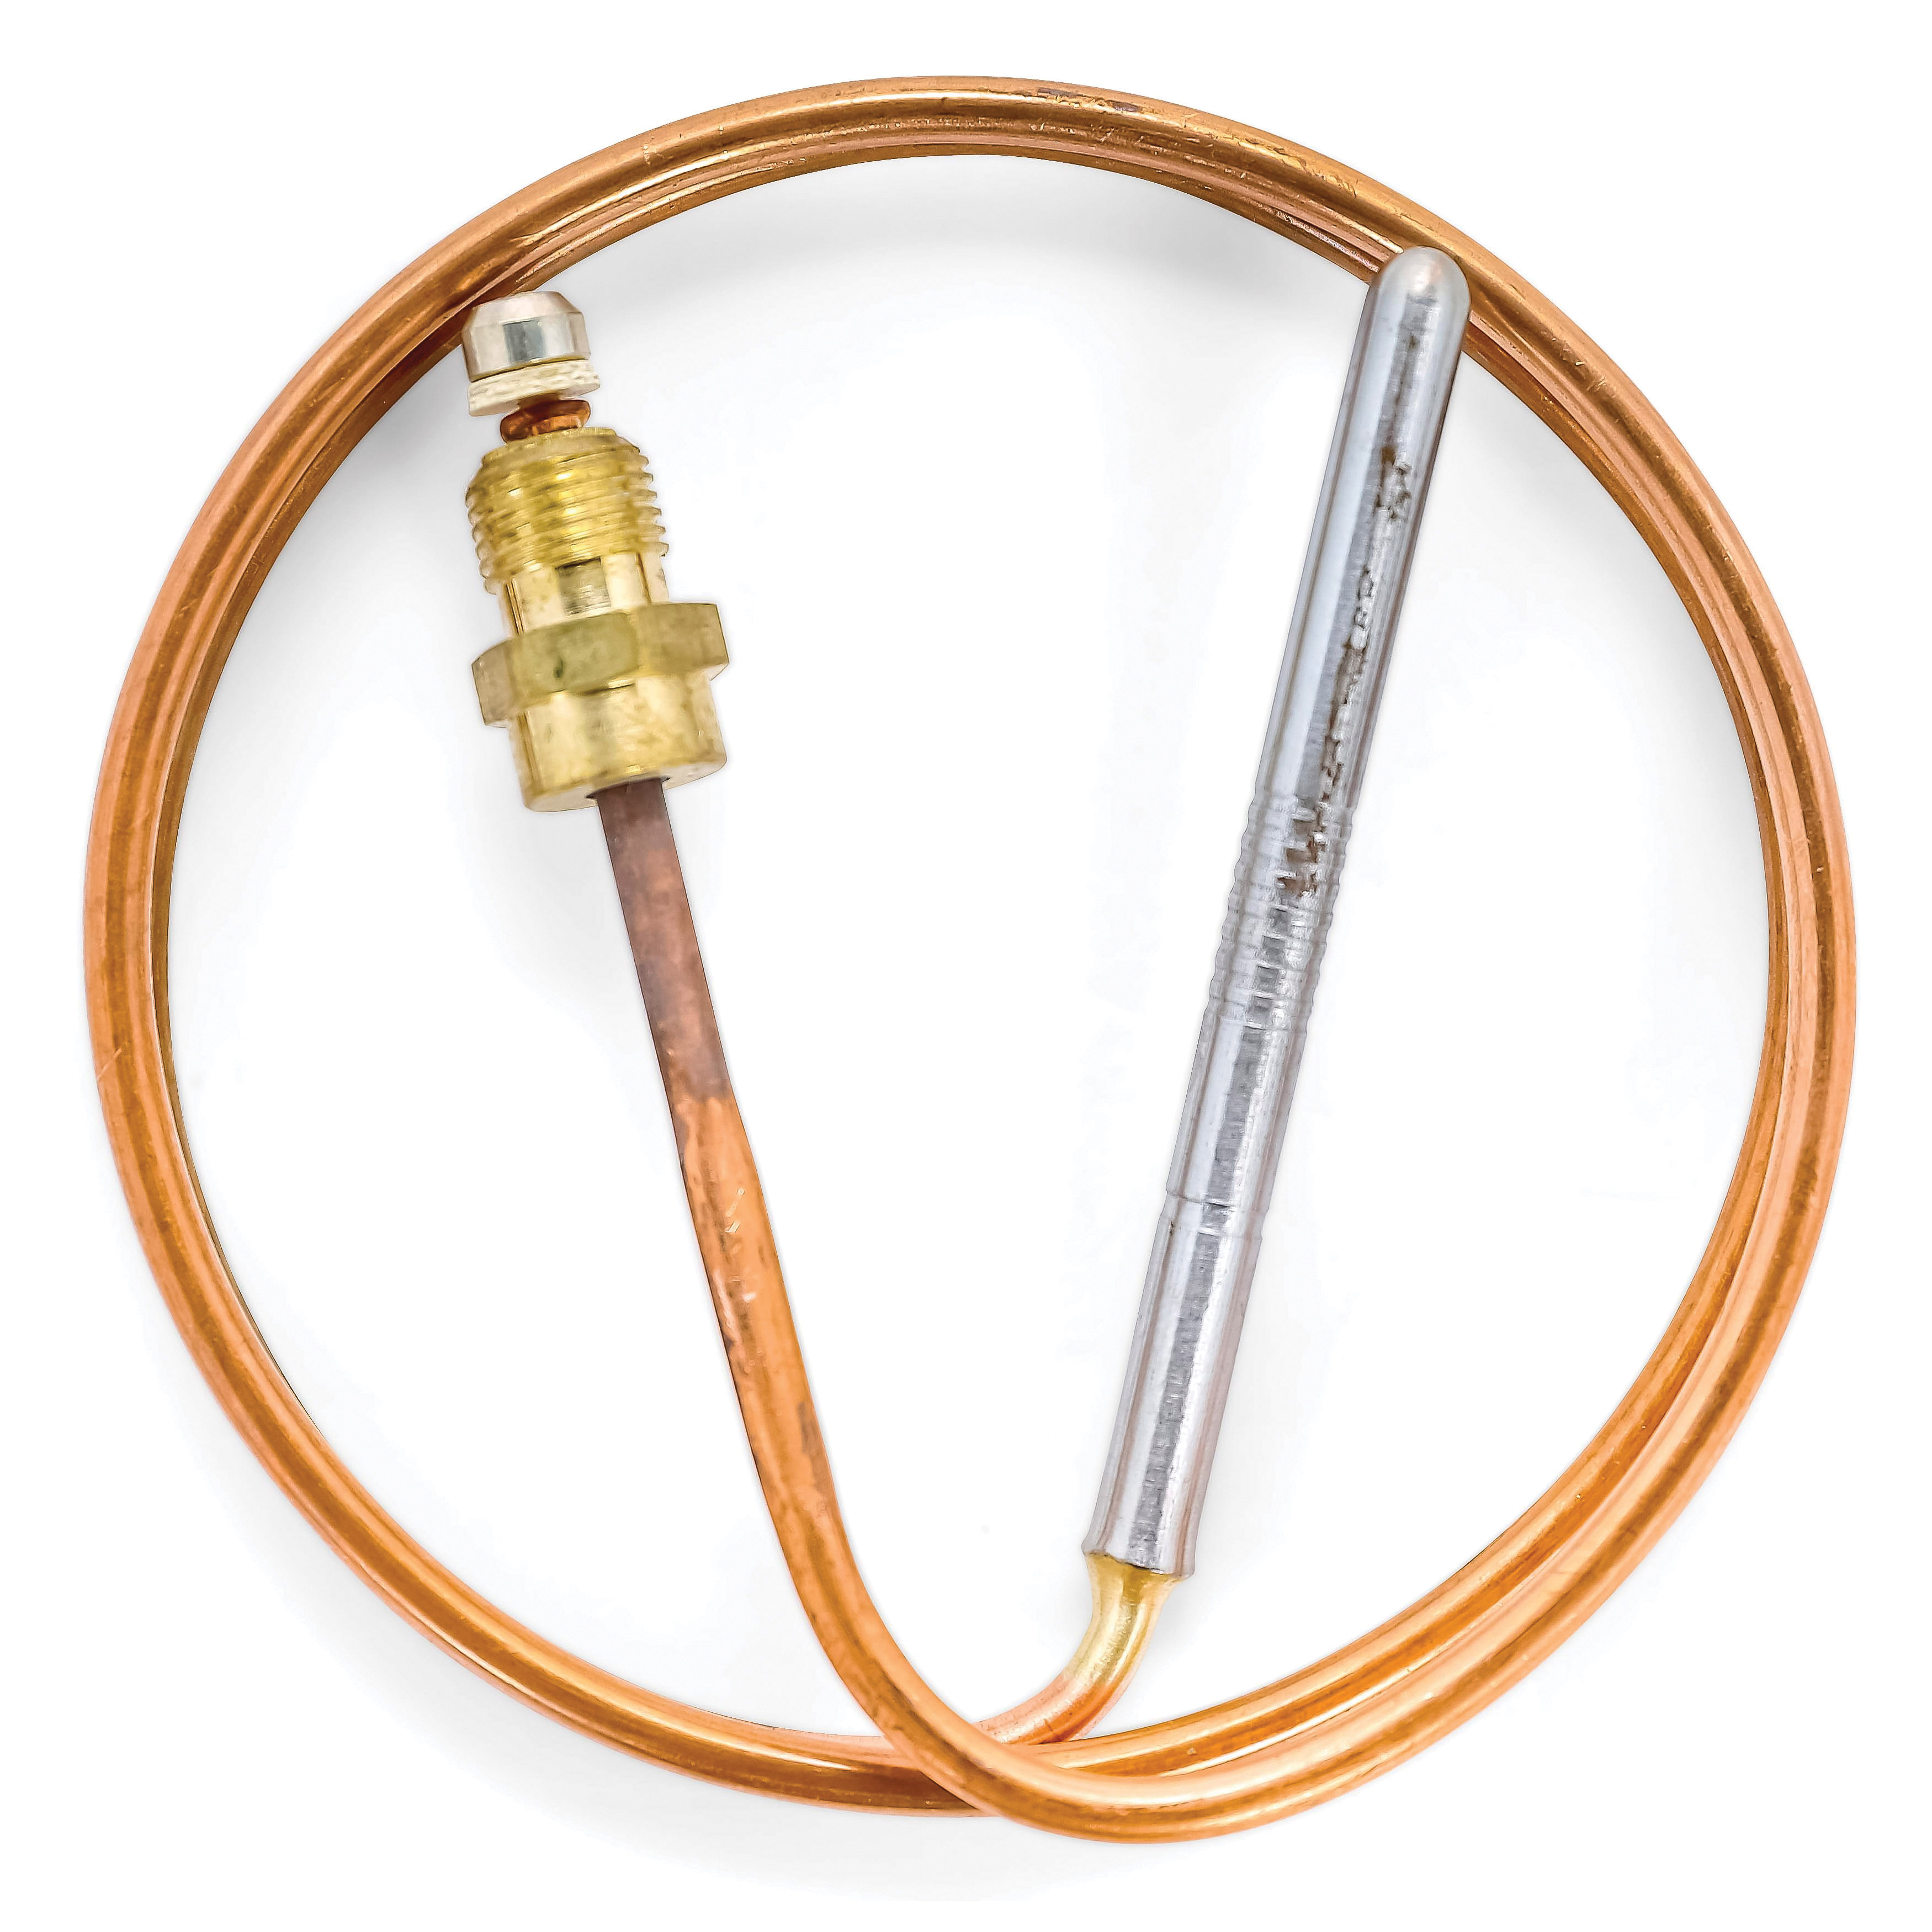 Camco 09291 Universal Bagged Thermocouple Kit, For Use With Standard RV LP Gas Water Heaters and Furnaces, Copper, Import